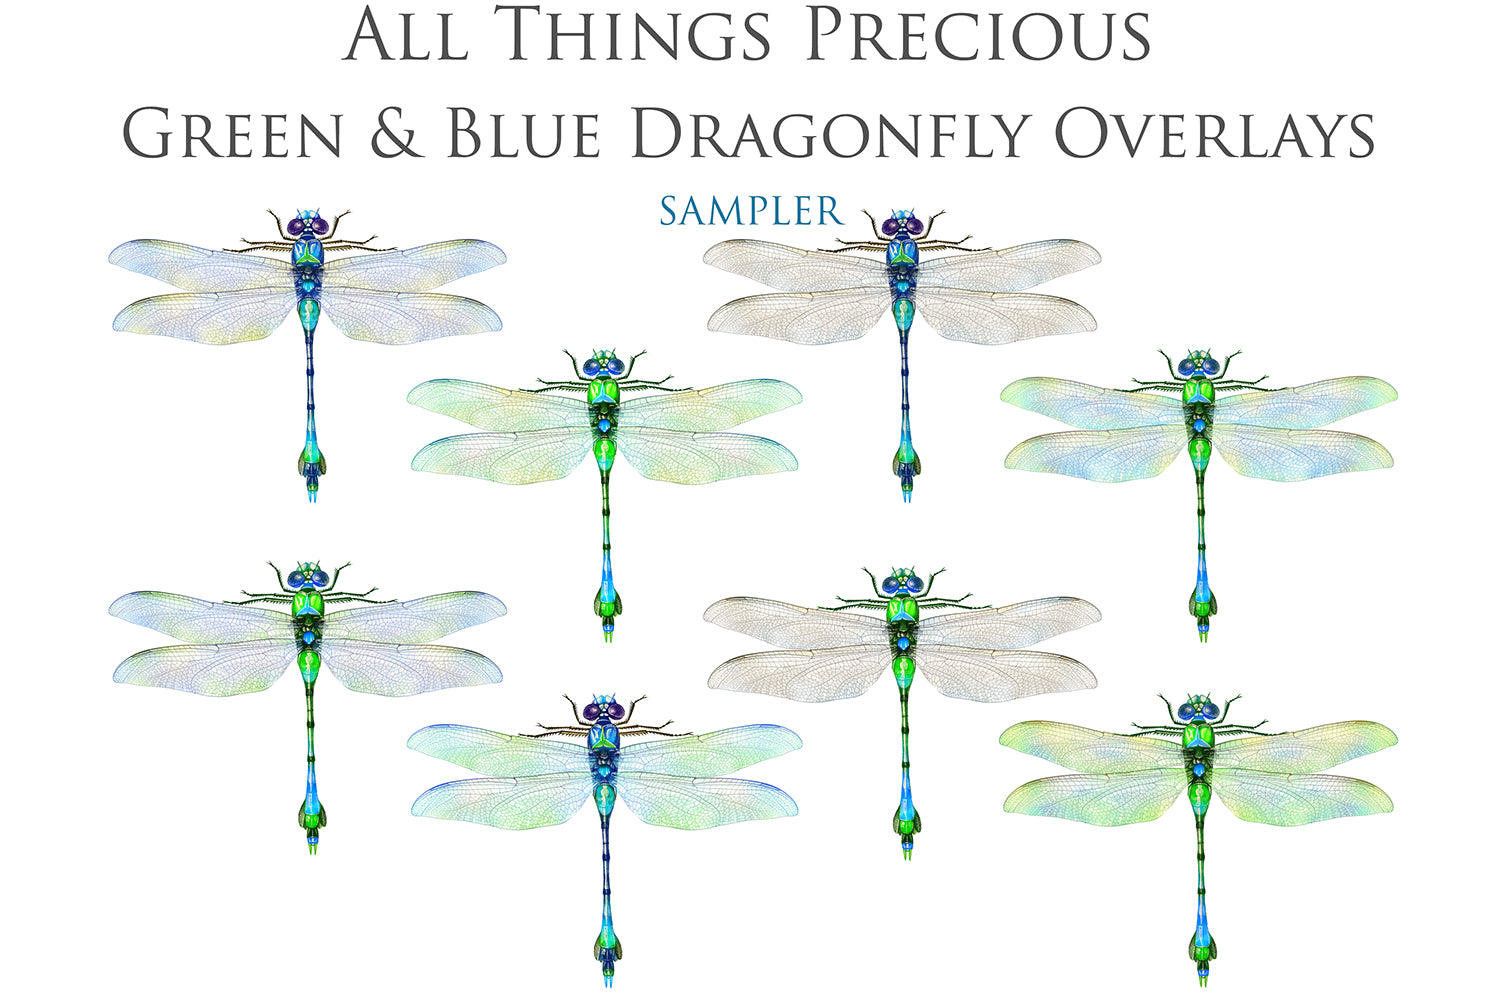 Png clipart for Photographers, Digital scrapbooking, Photo Overlays, Digital Overlay, Png Overlays, High resolution, Dragonfly overlays, Dragonflies clipart by ATP Textures Photoshop.